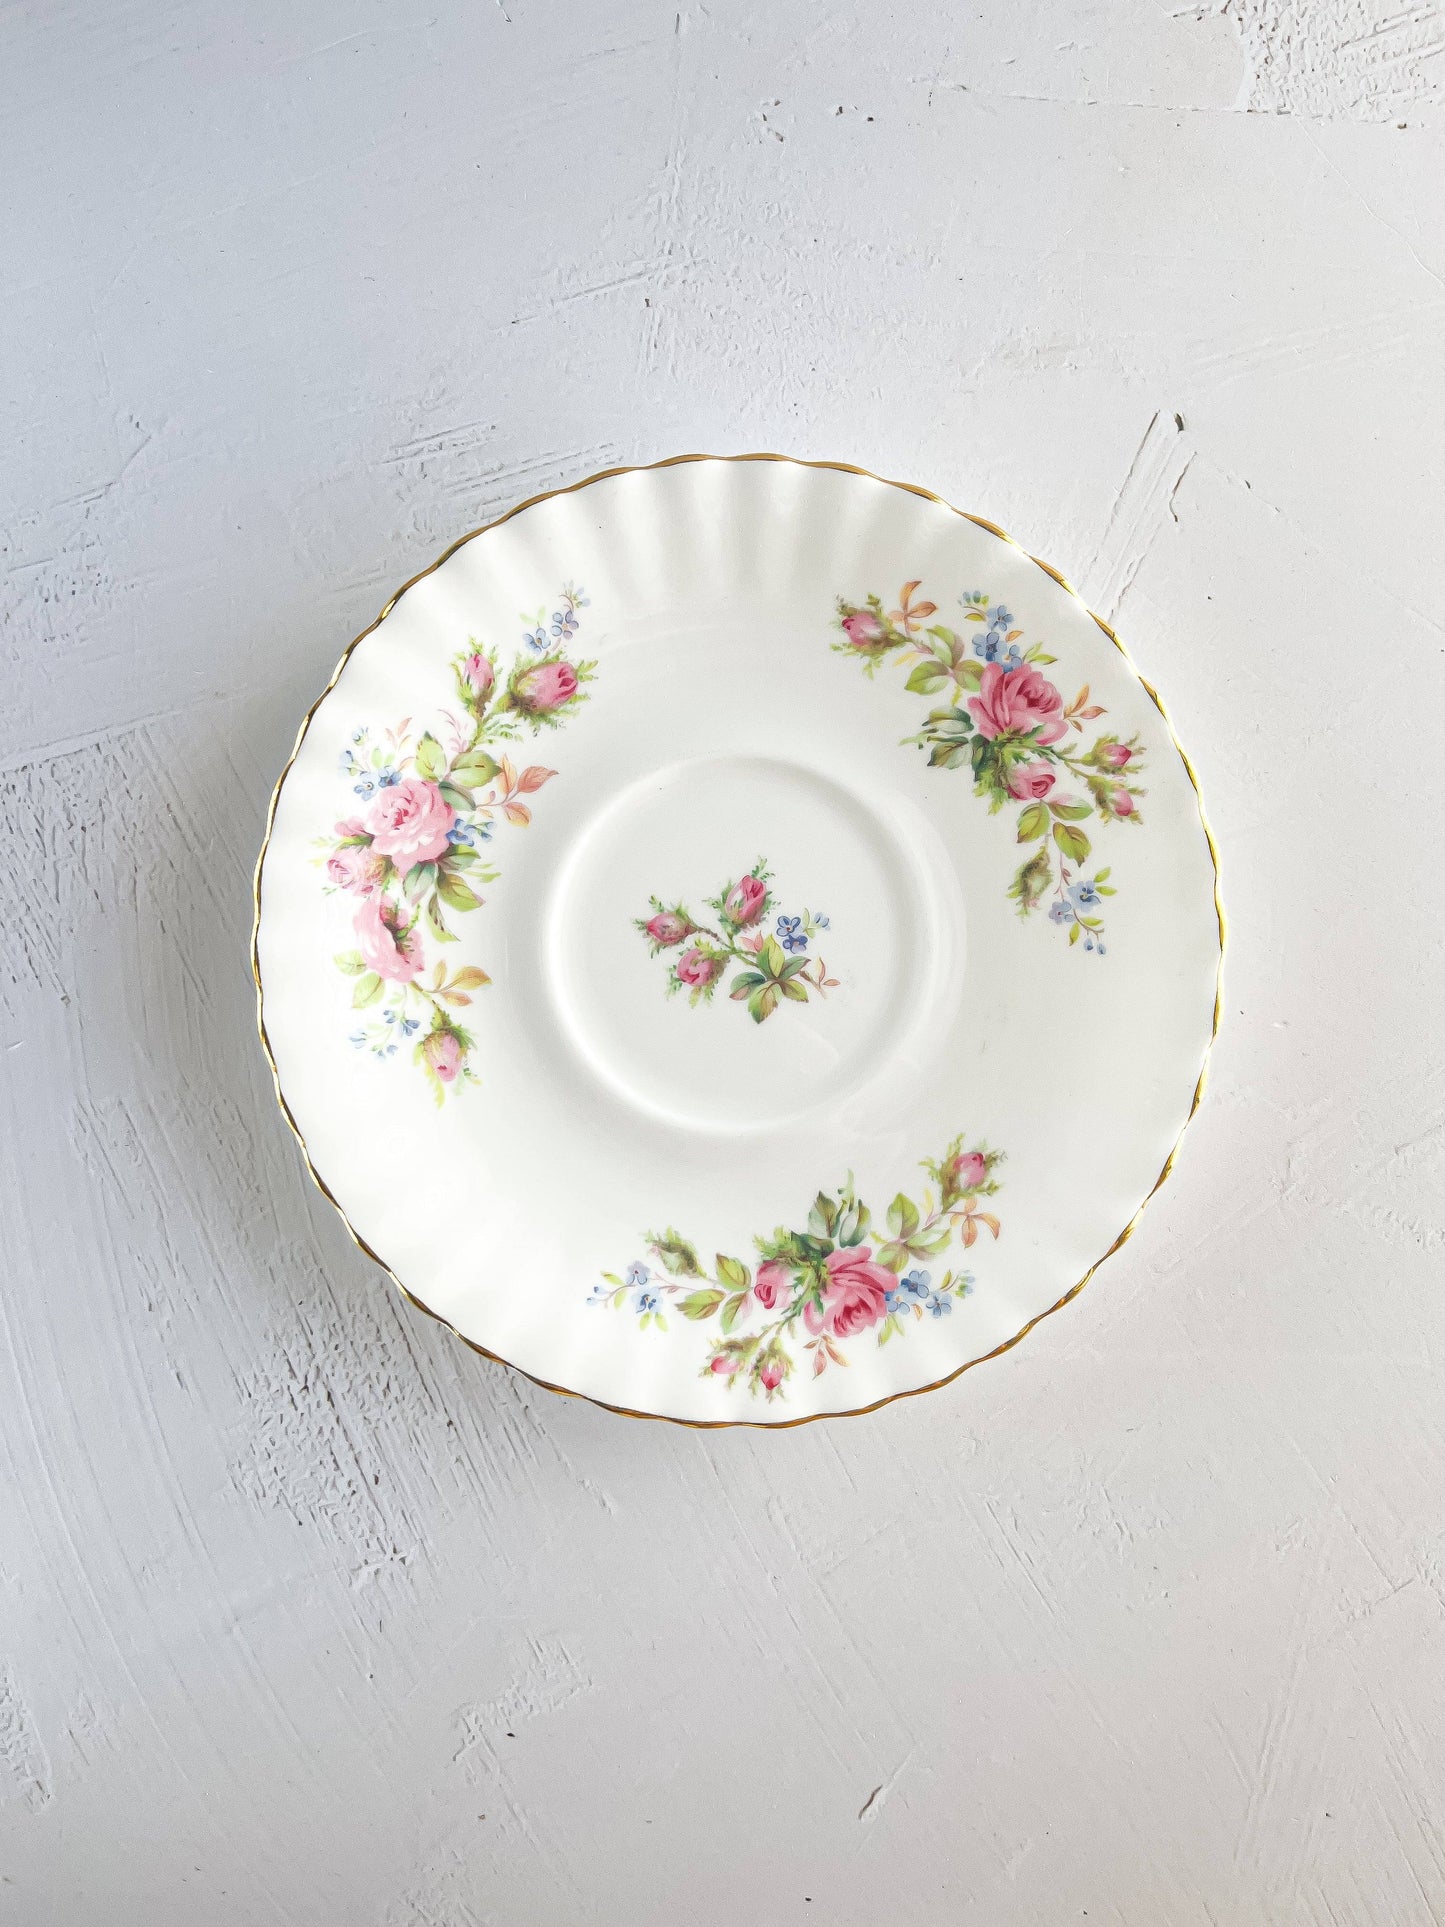 Royal Albert Footed Cream Soup Bowl & Saucer Set - 'Moss Rose' Collection - SOSC Home